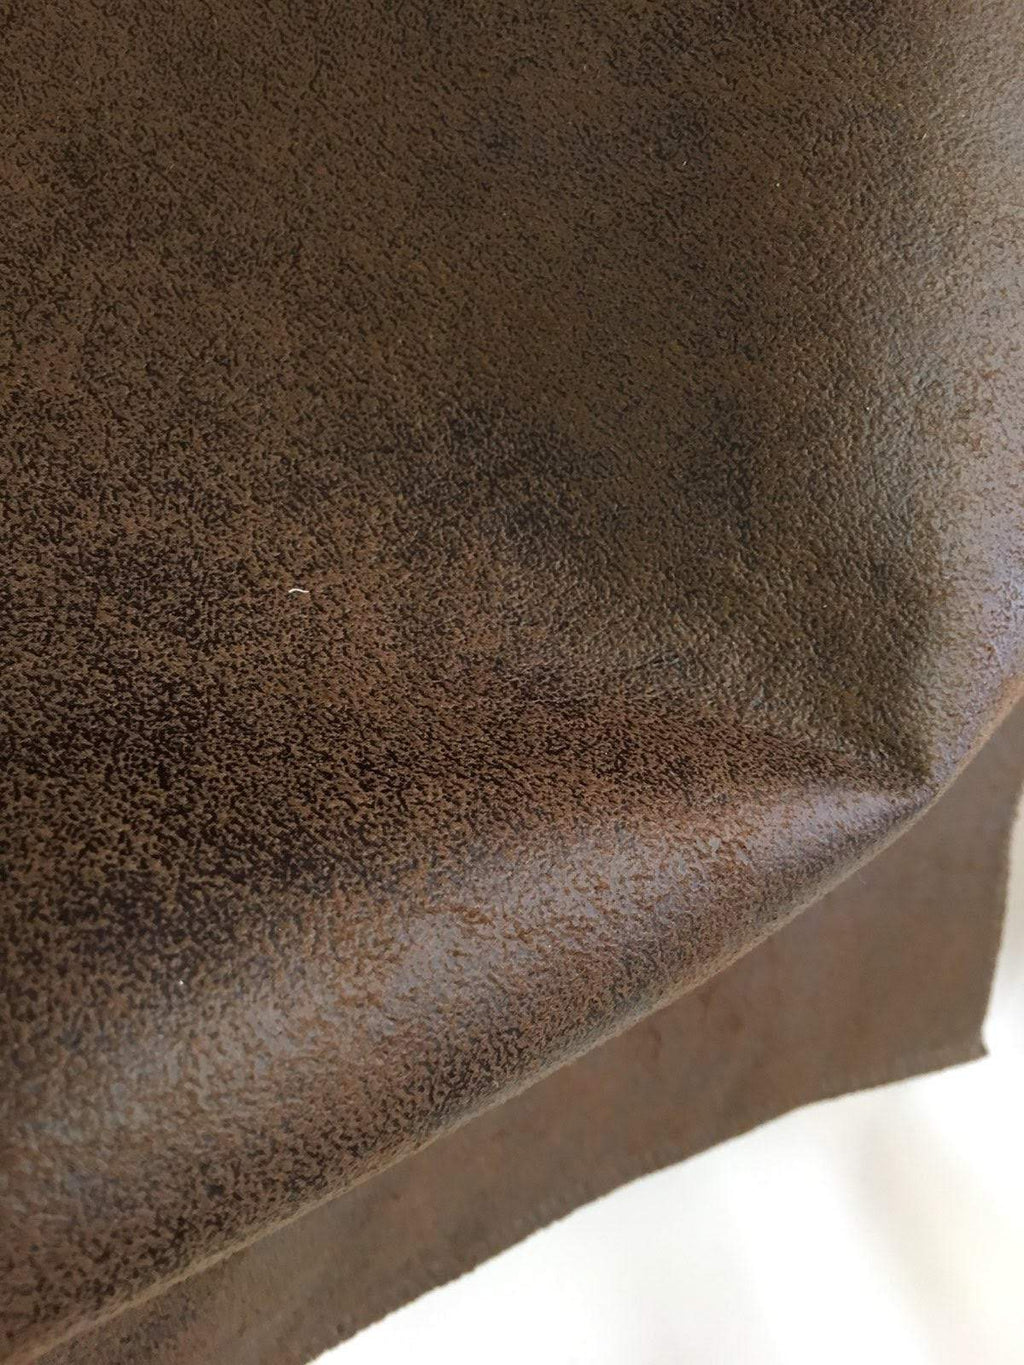 brandy-dakota-faux-micro-suede-felt-backing-54-wide-upholstery-fabric-by-the-yard